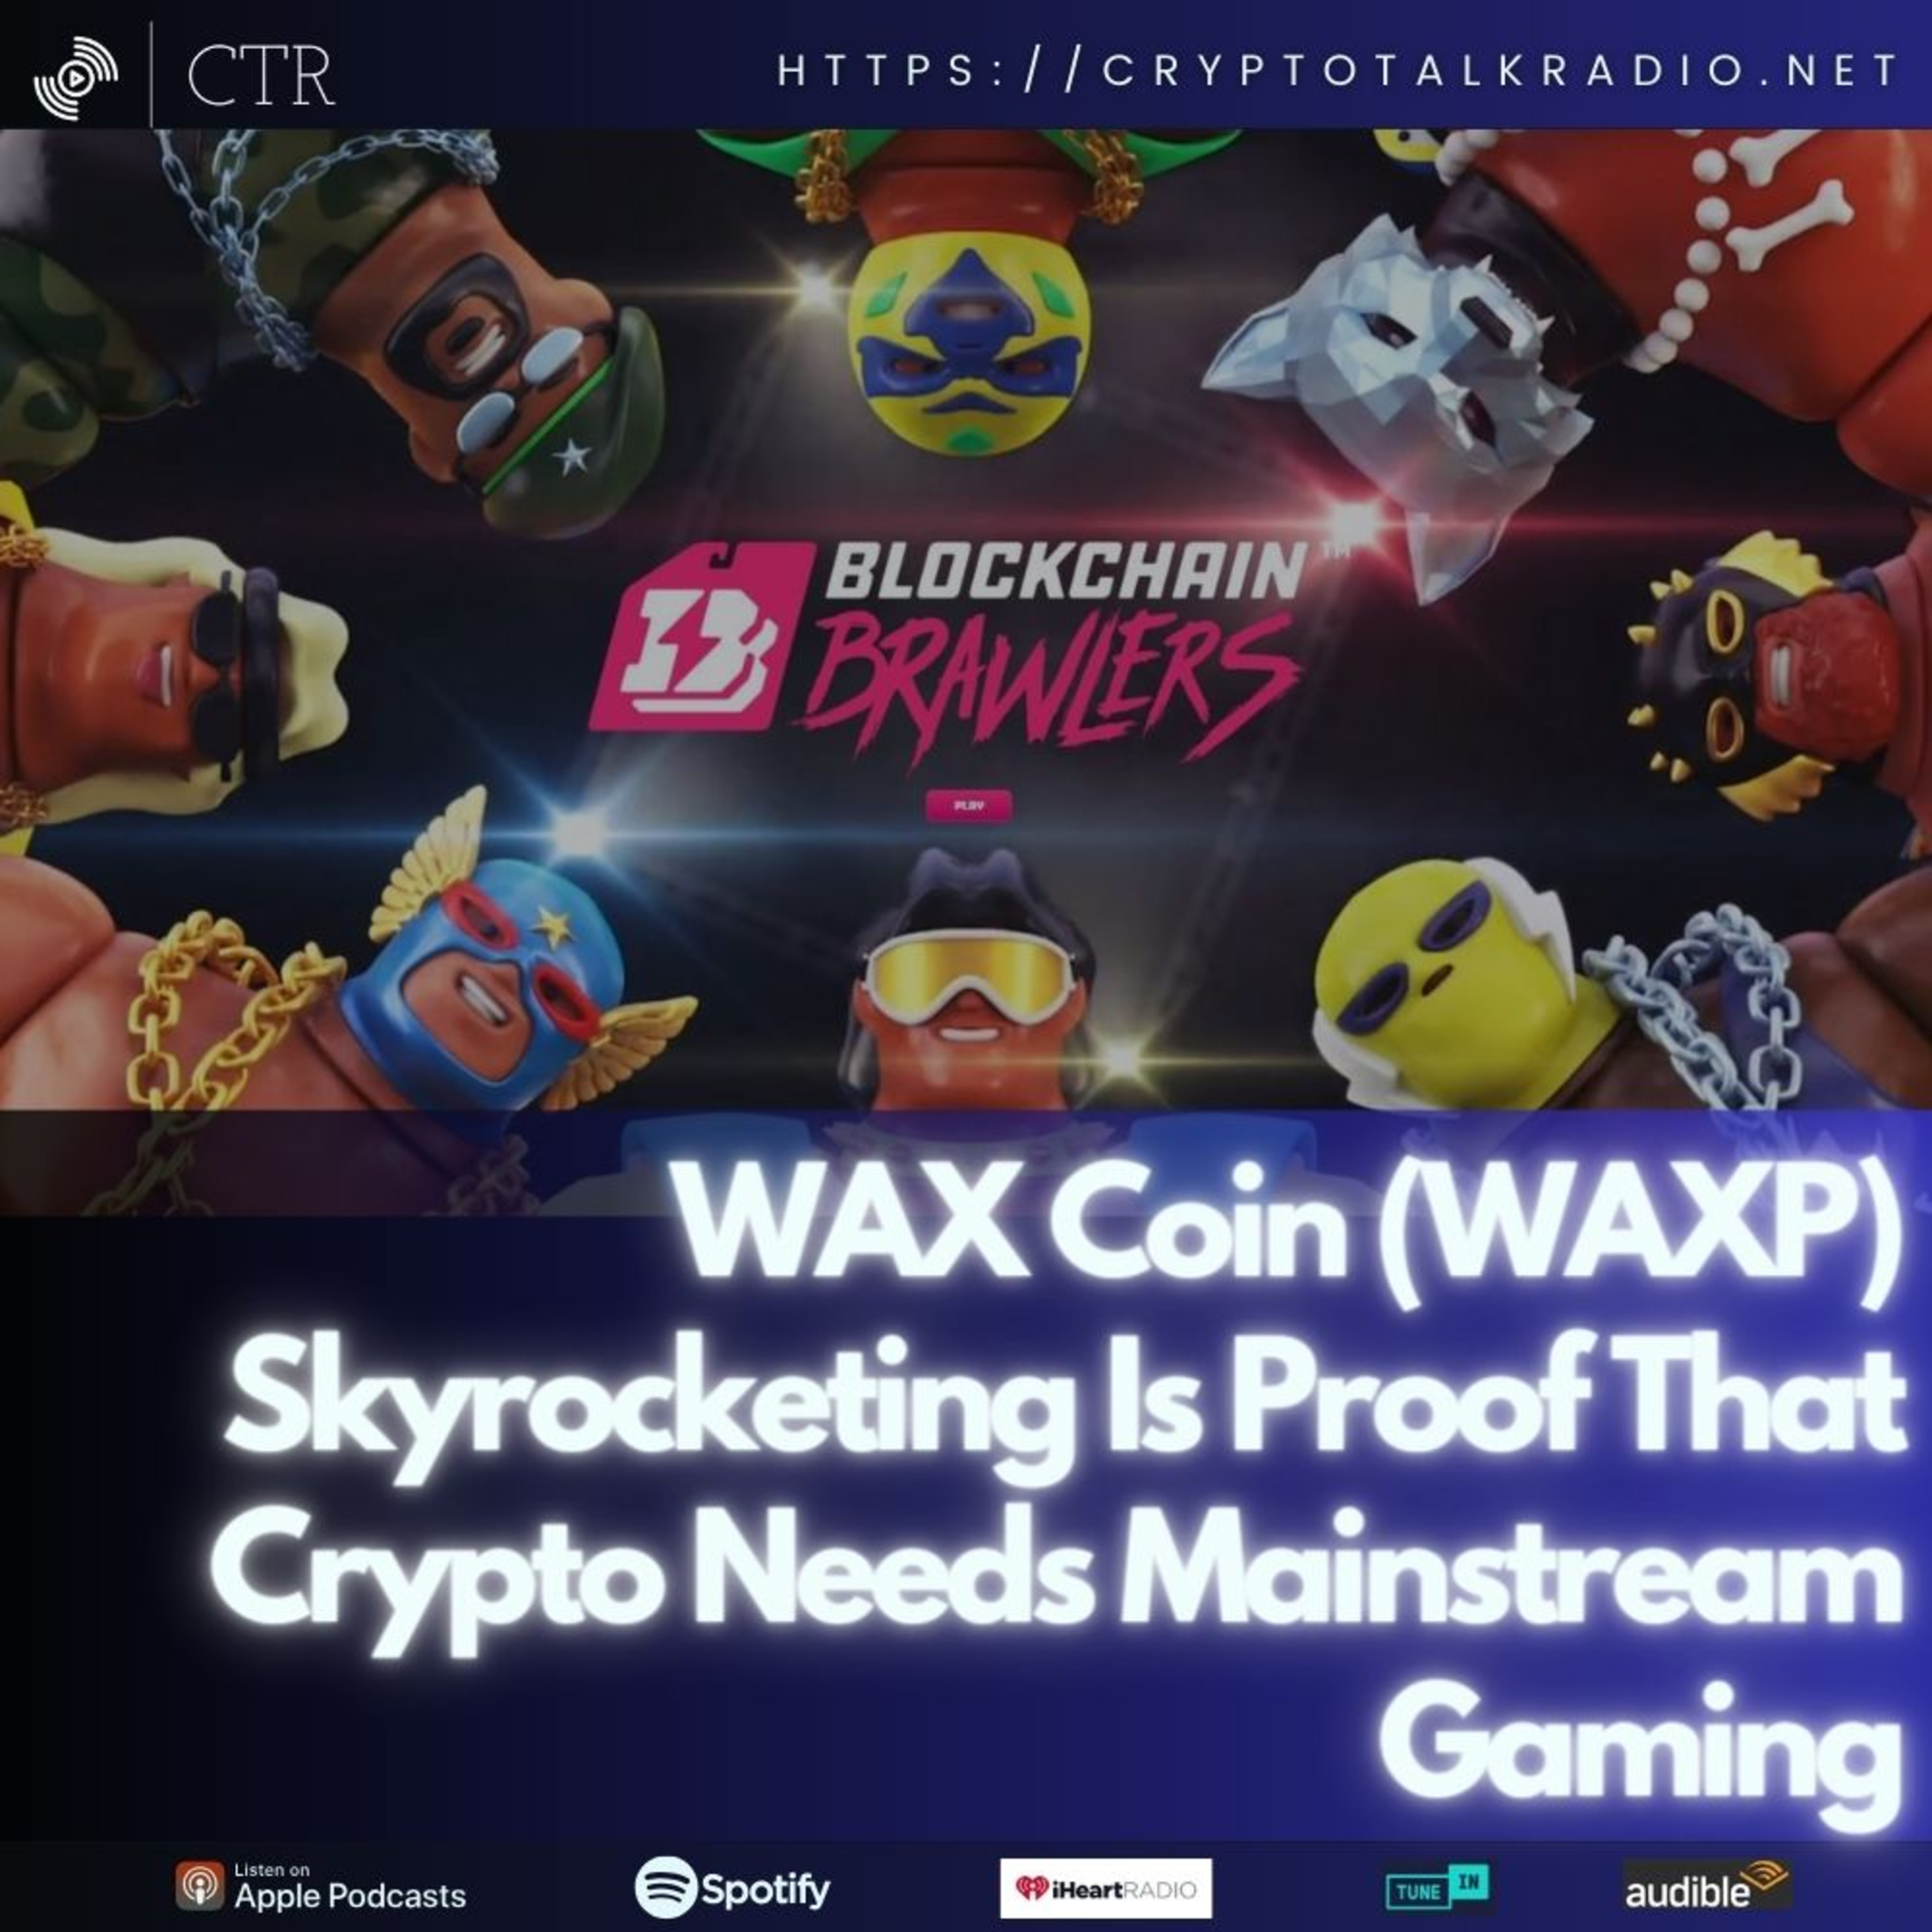 WAX Coin ( #WAXP ) Skyrocketing Is Proof That Crypto Needs Mainstream Gaming